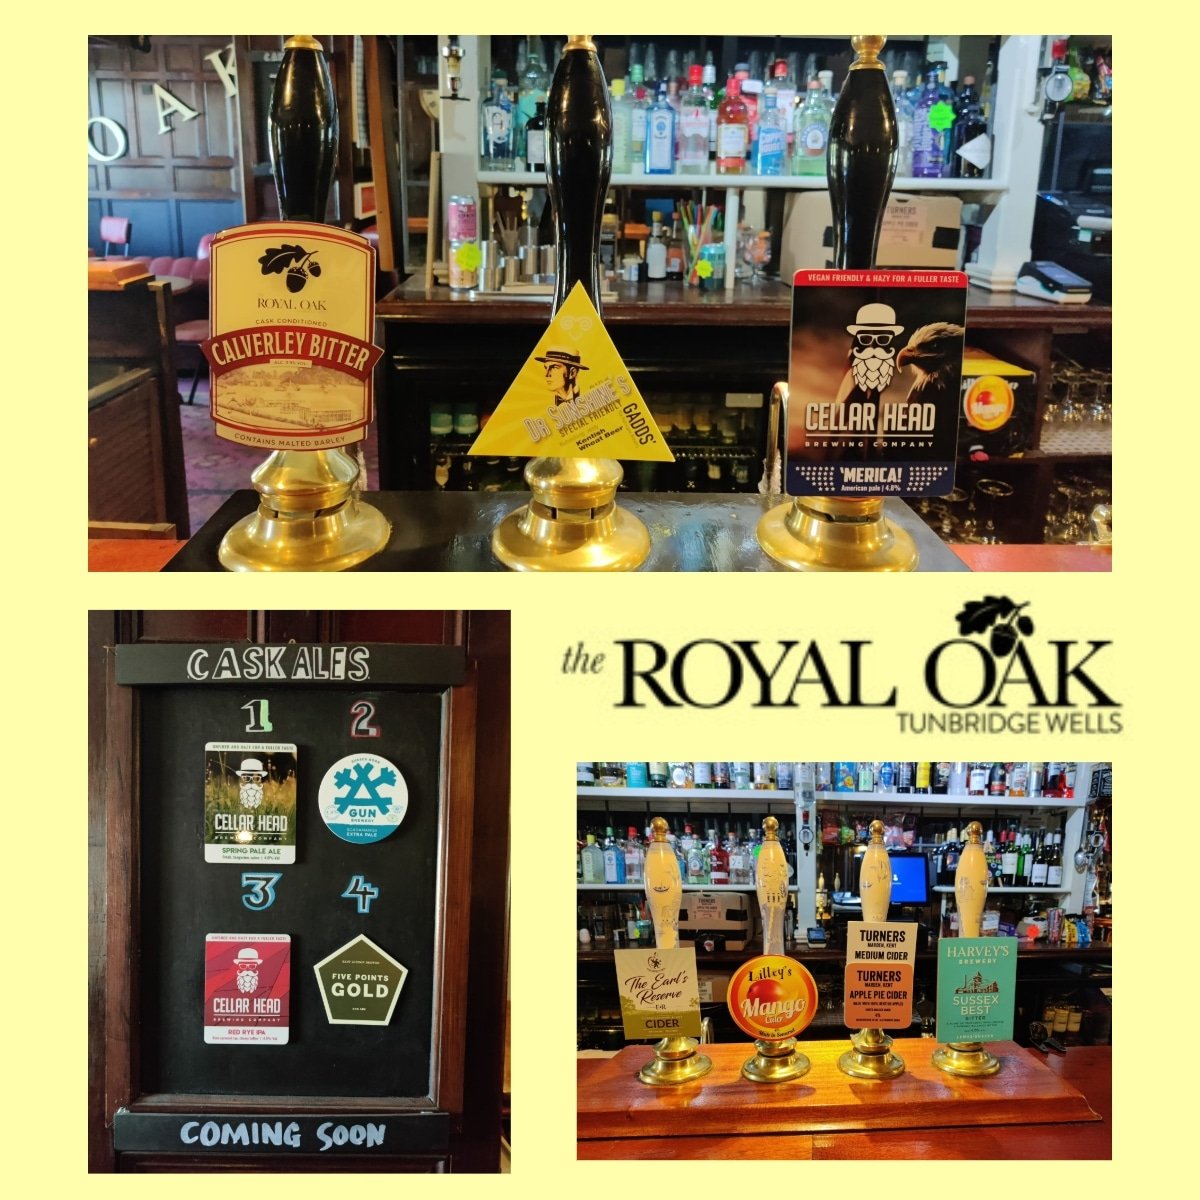 Today's cask ales now pouring and our coming soon board.

OPEN from 4pm

#harveysbrewery #calverleybitter #gaddsbrewery #westkentcamra #twpubs #realale #realalefinder #twcaskale #twrealale #tunbridgewellspubs